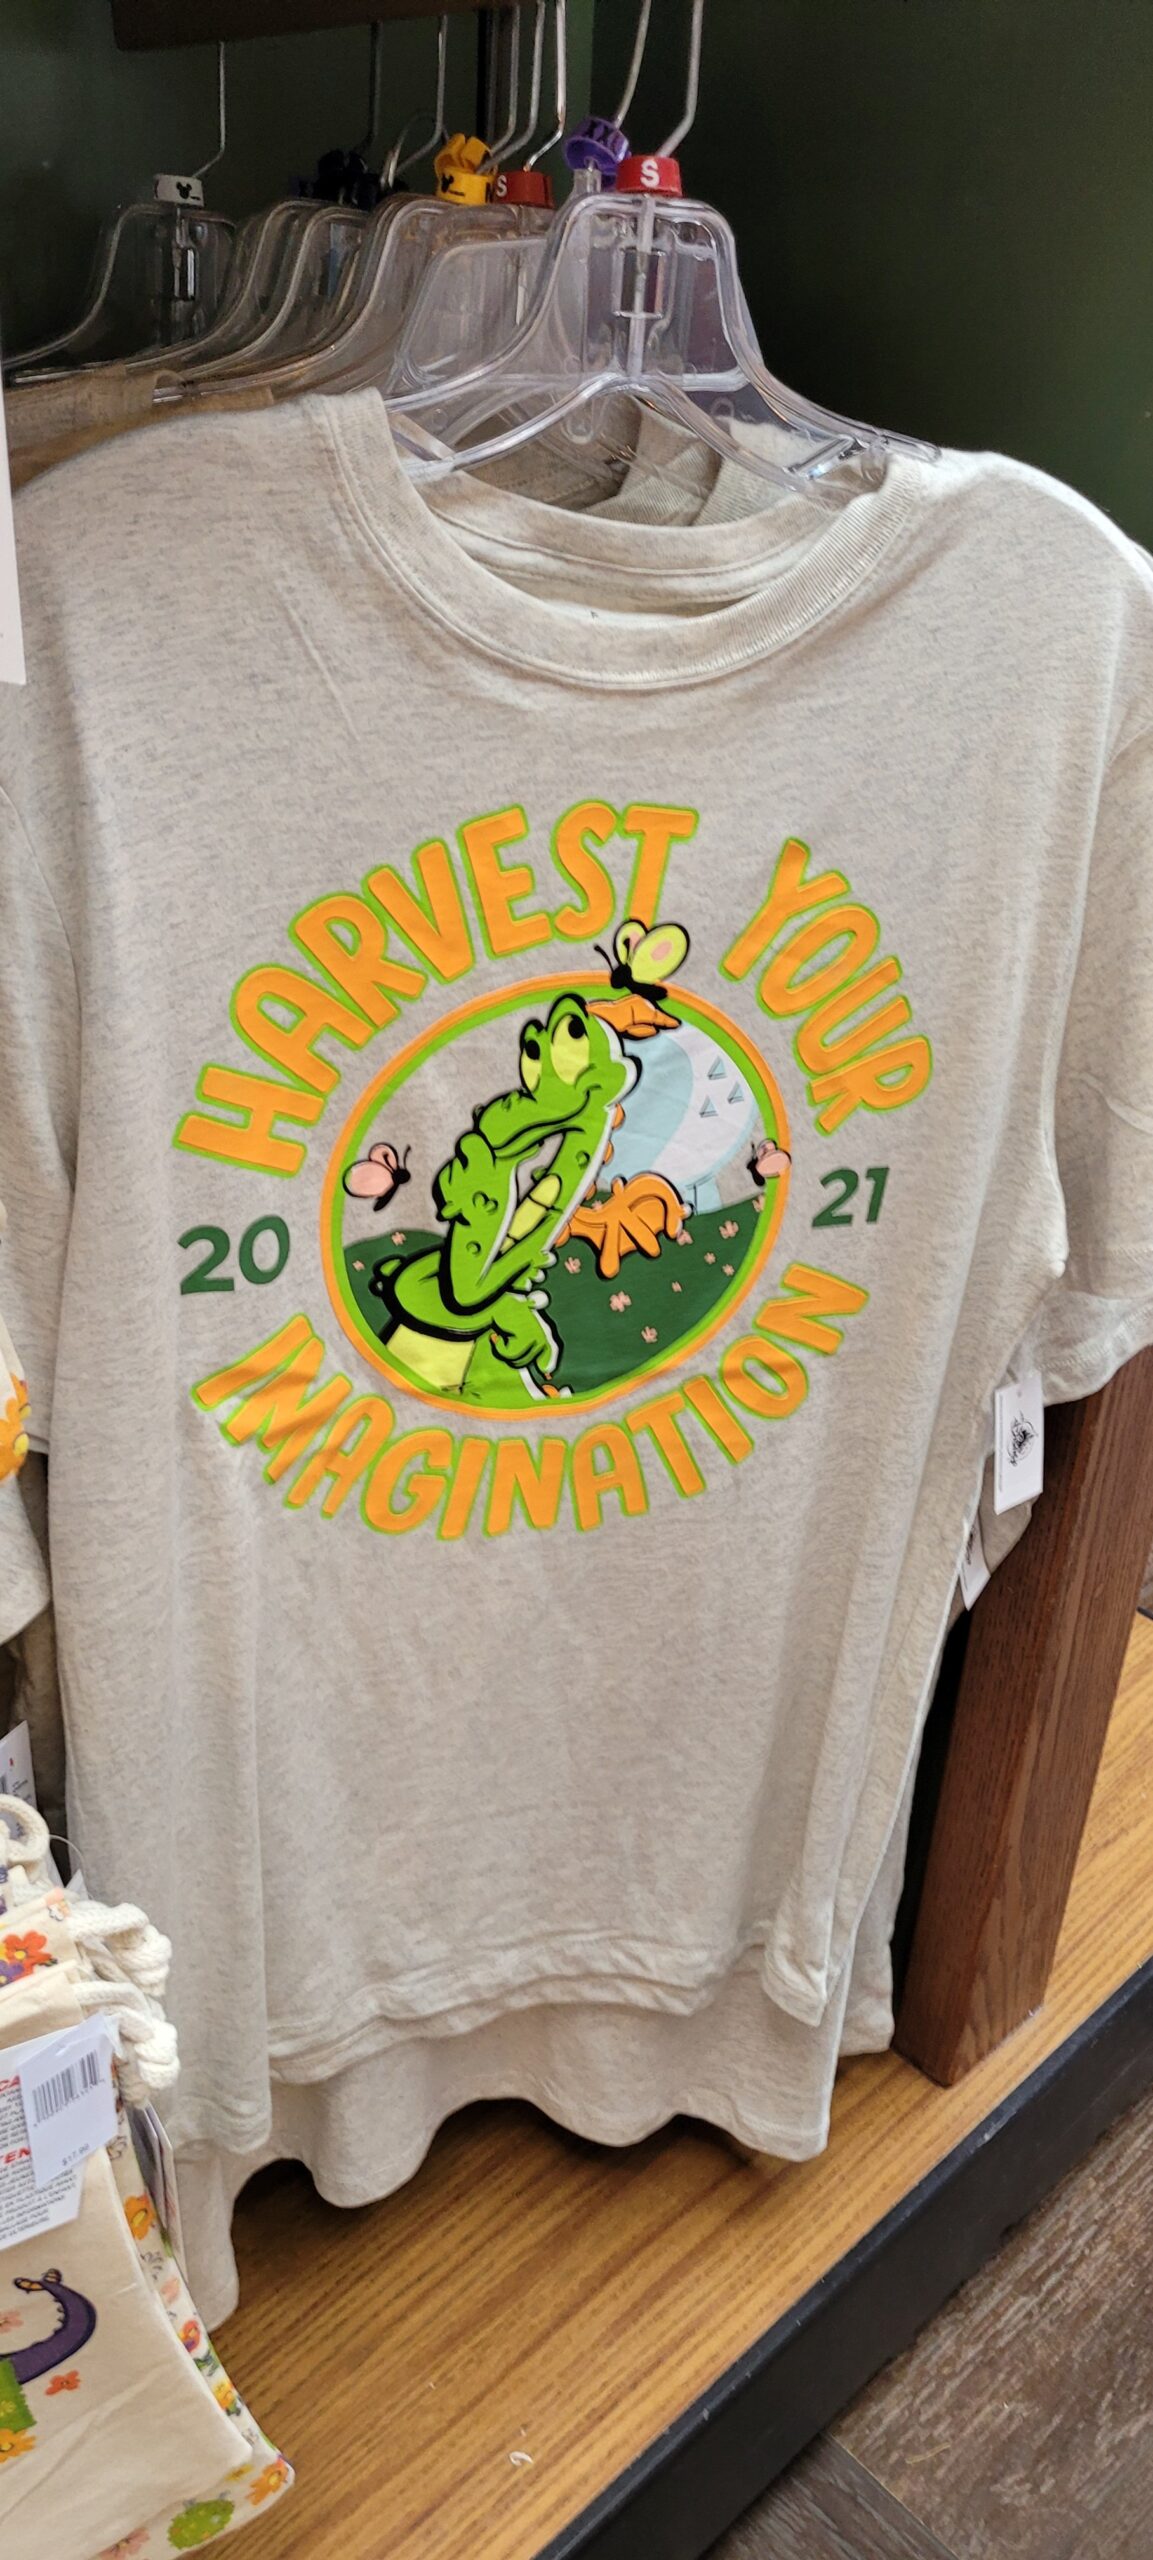 First Look At The 2021 Epcot Flower And Garden Festival Merchandise